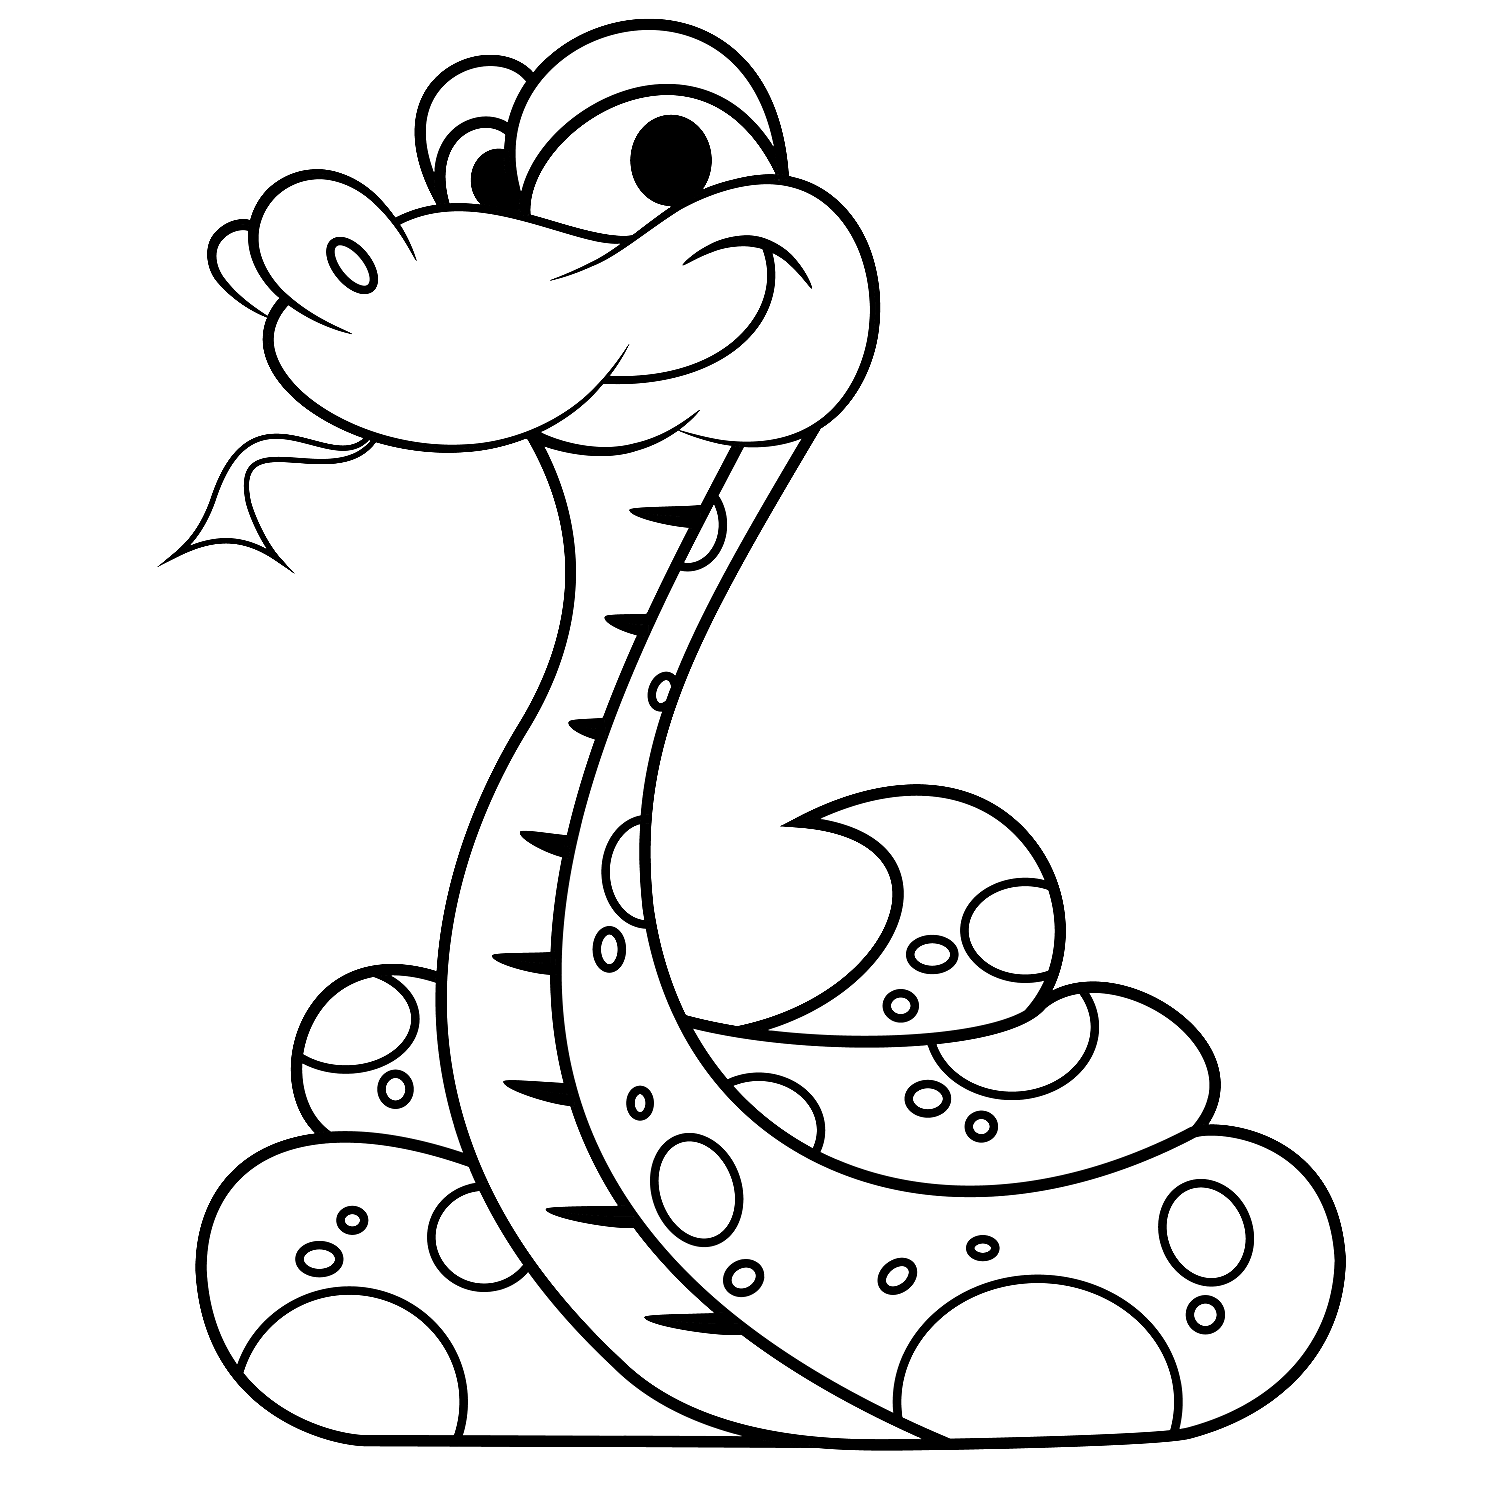 Snake Printable Coloring Pages 2